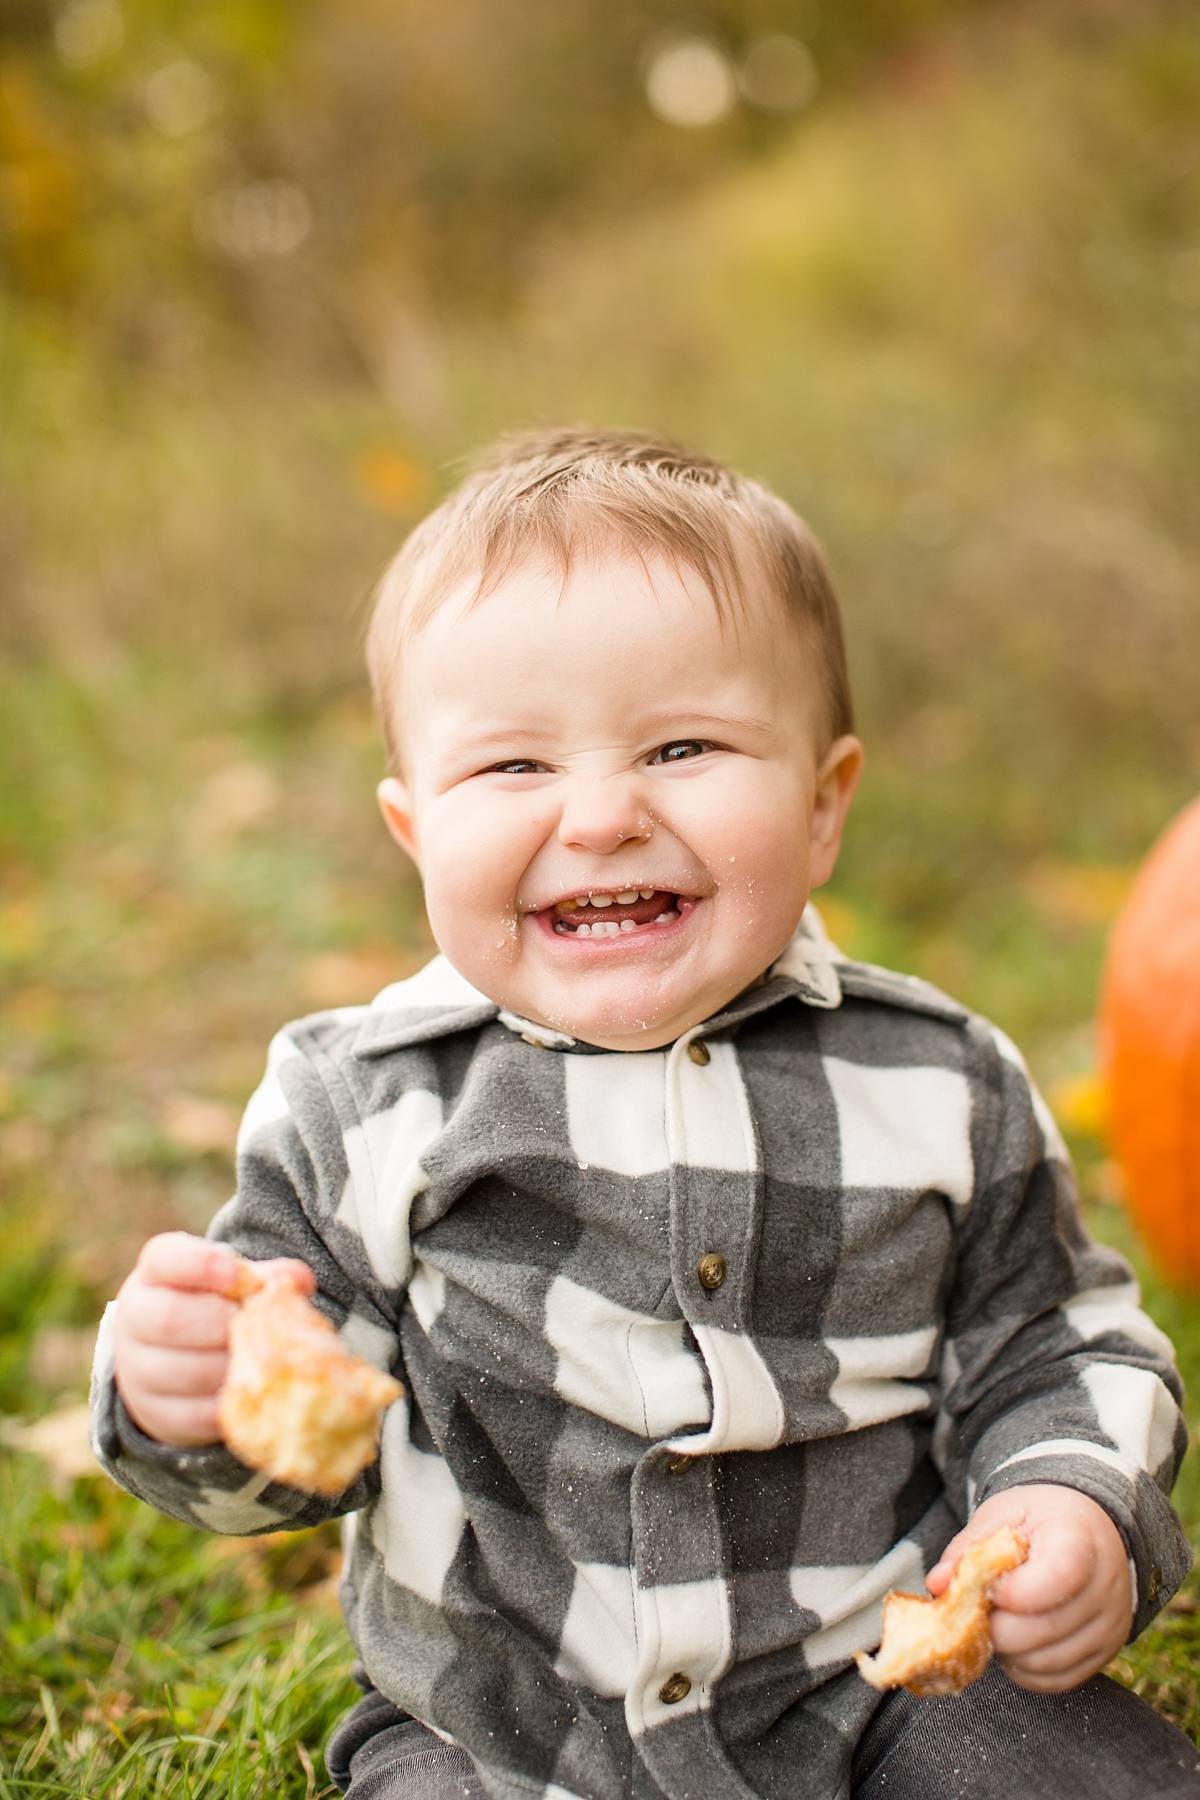 Fall family photographs with cider mill doughnuts at Lincoln Brick Park in Grand Ledge, Michigan